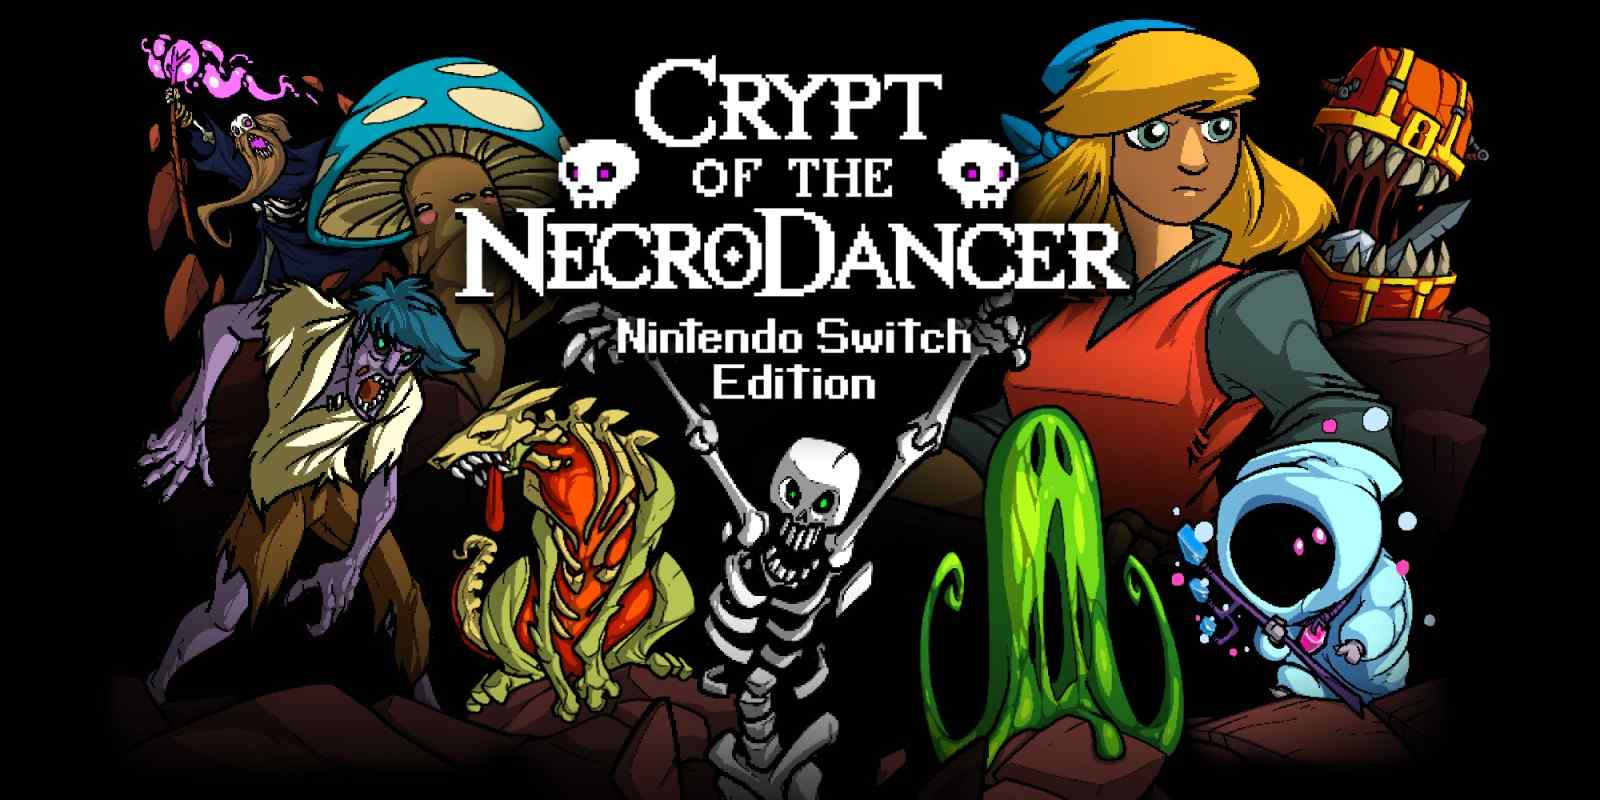 Crypt of the NecroDancer is a challenging yet rewarding rogue-like rhythm game where the beat guides your every move.